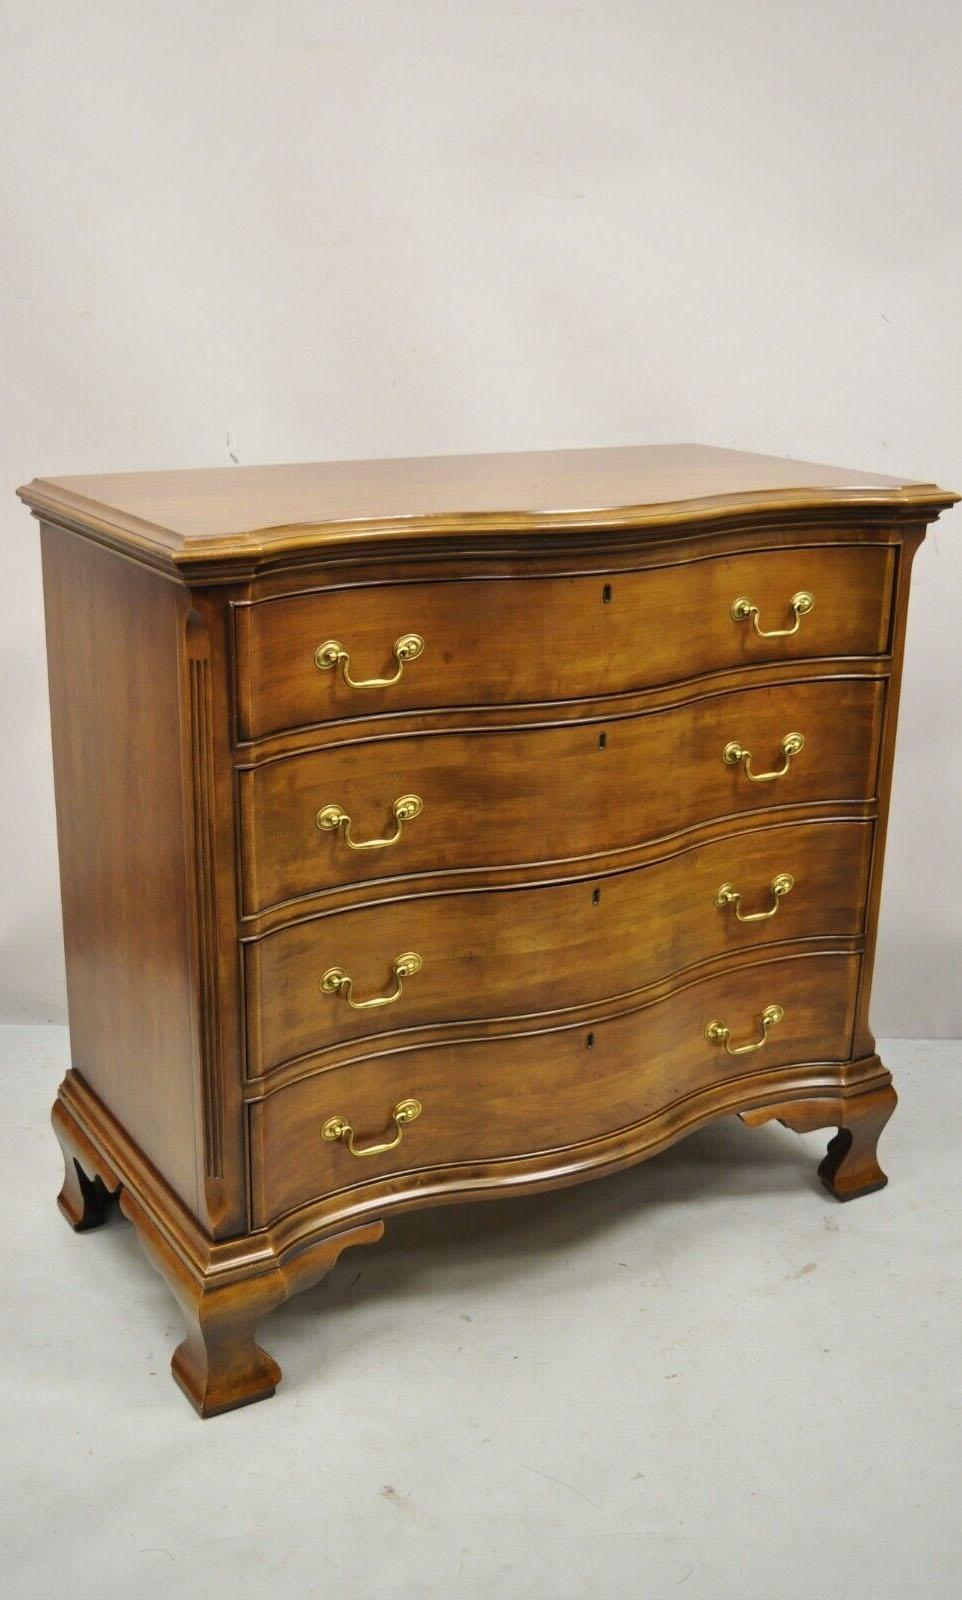 Century Furniture American Life Collection Henry Ford Museum cherry 4 drawer chest dresser. Item features bowed front, solid thick construction, 4 dovetailed drawers, original label, solid brass hardware, quality American craftsmanship, great style